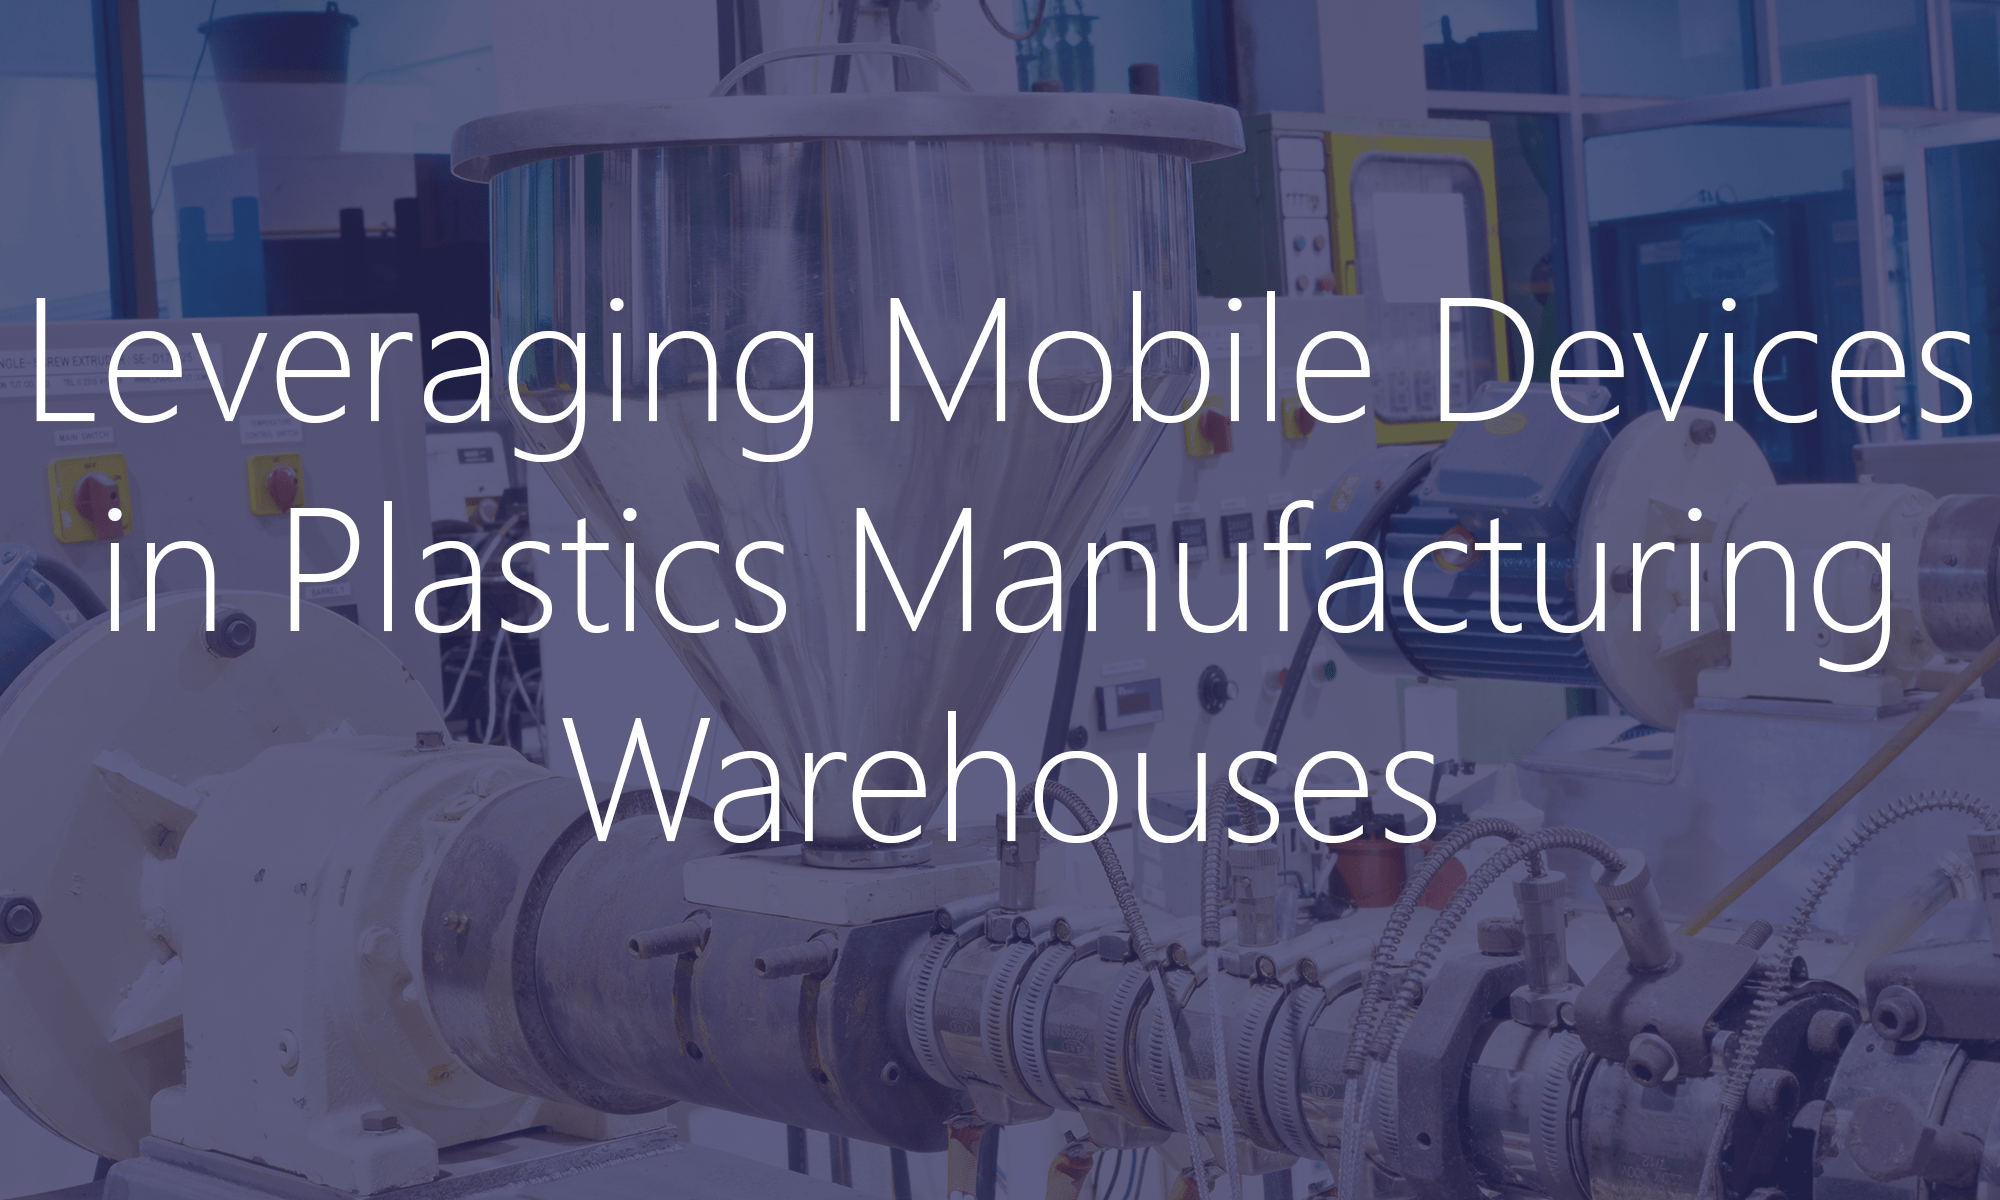 Mobile Devices in Plastics Manufacturing Warehouses